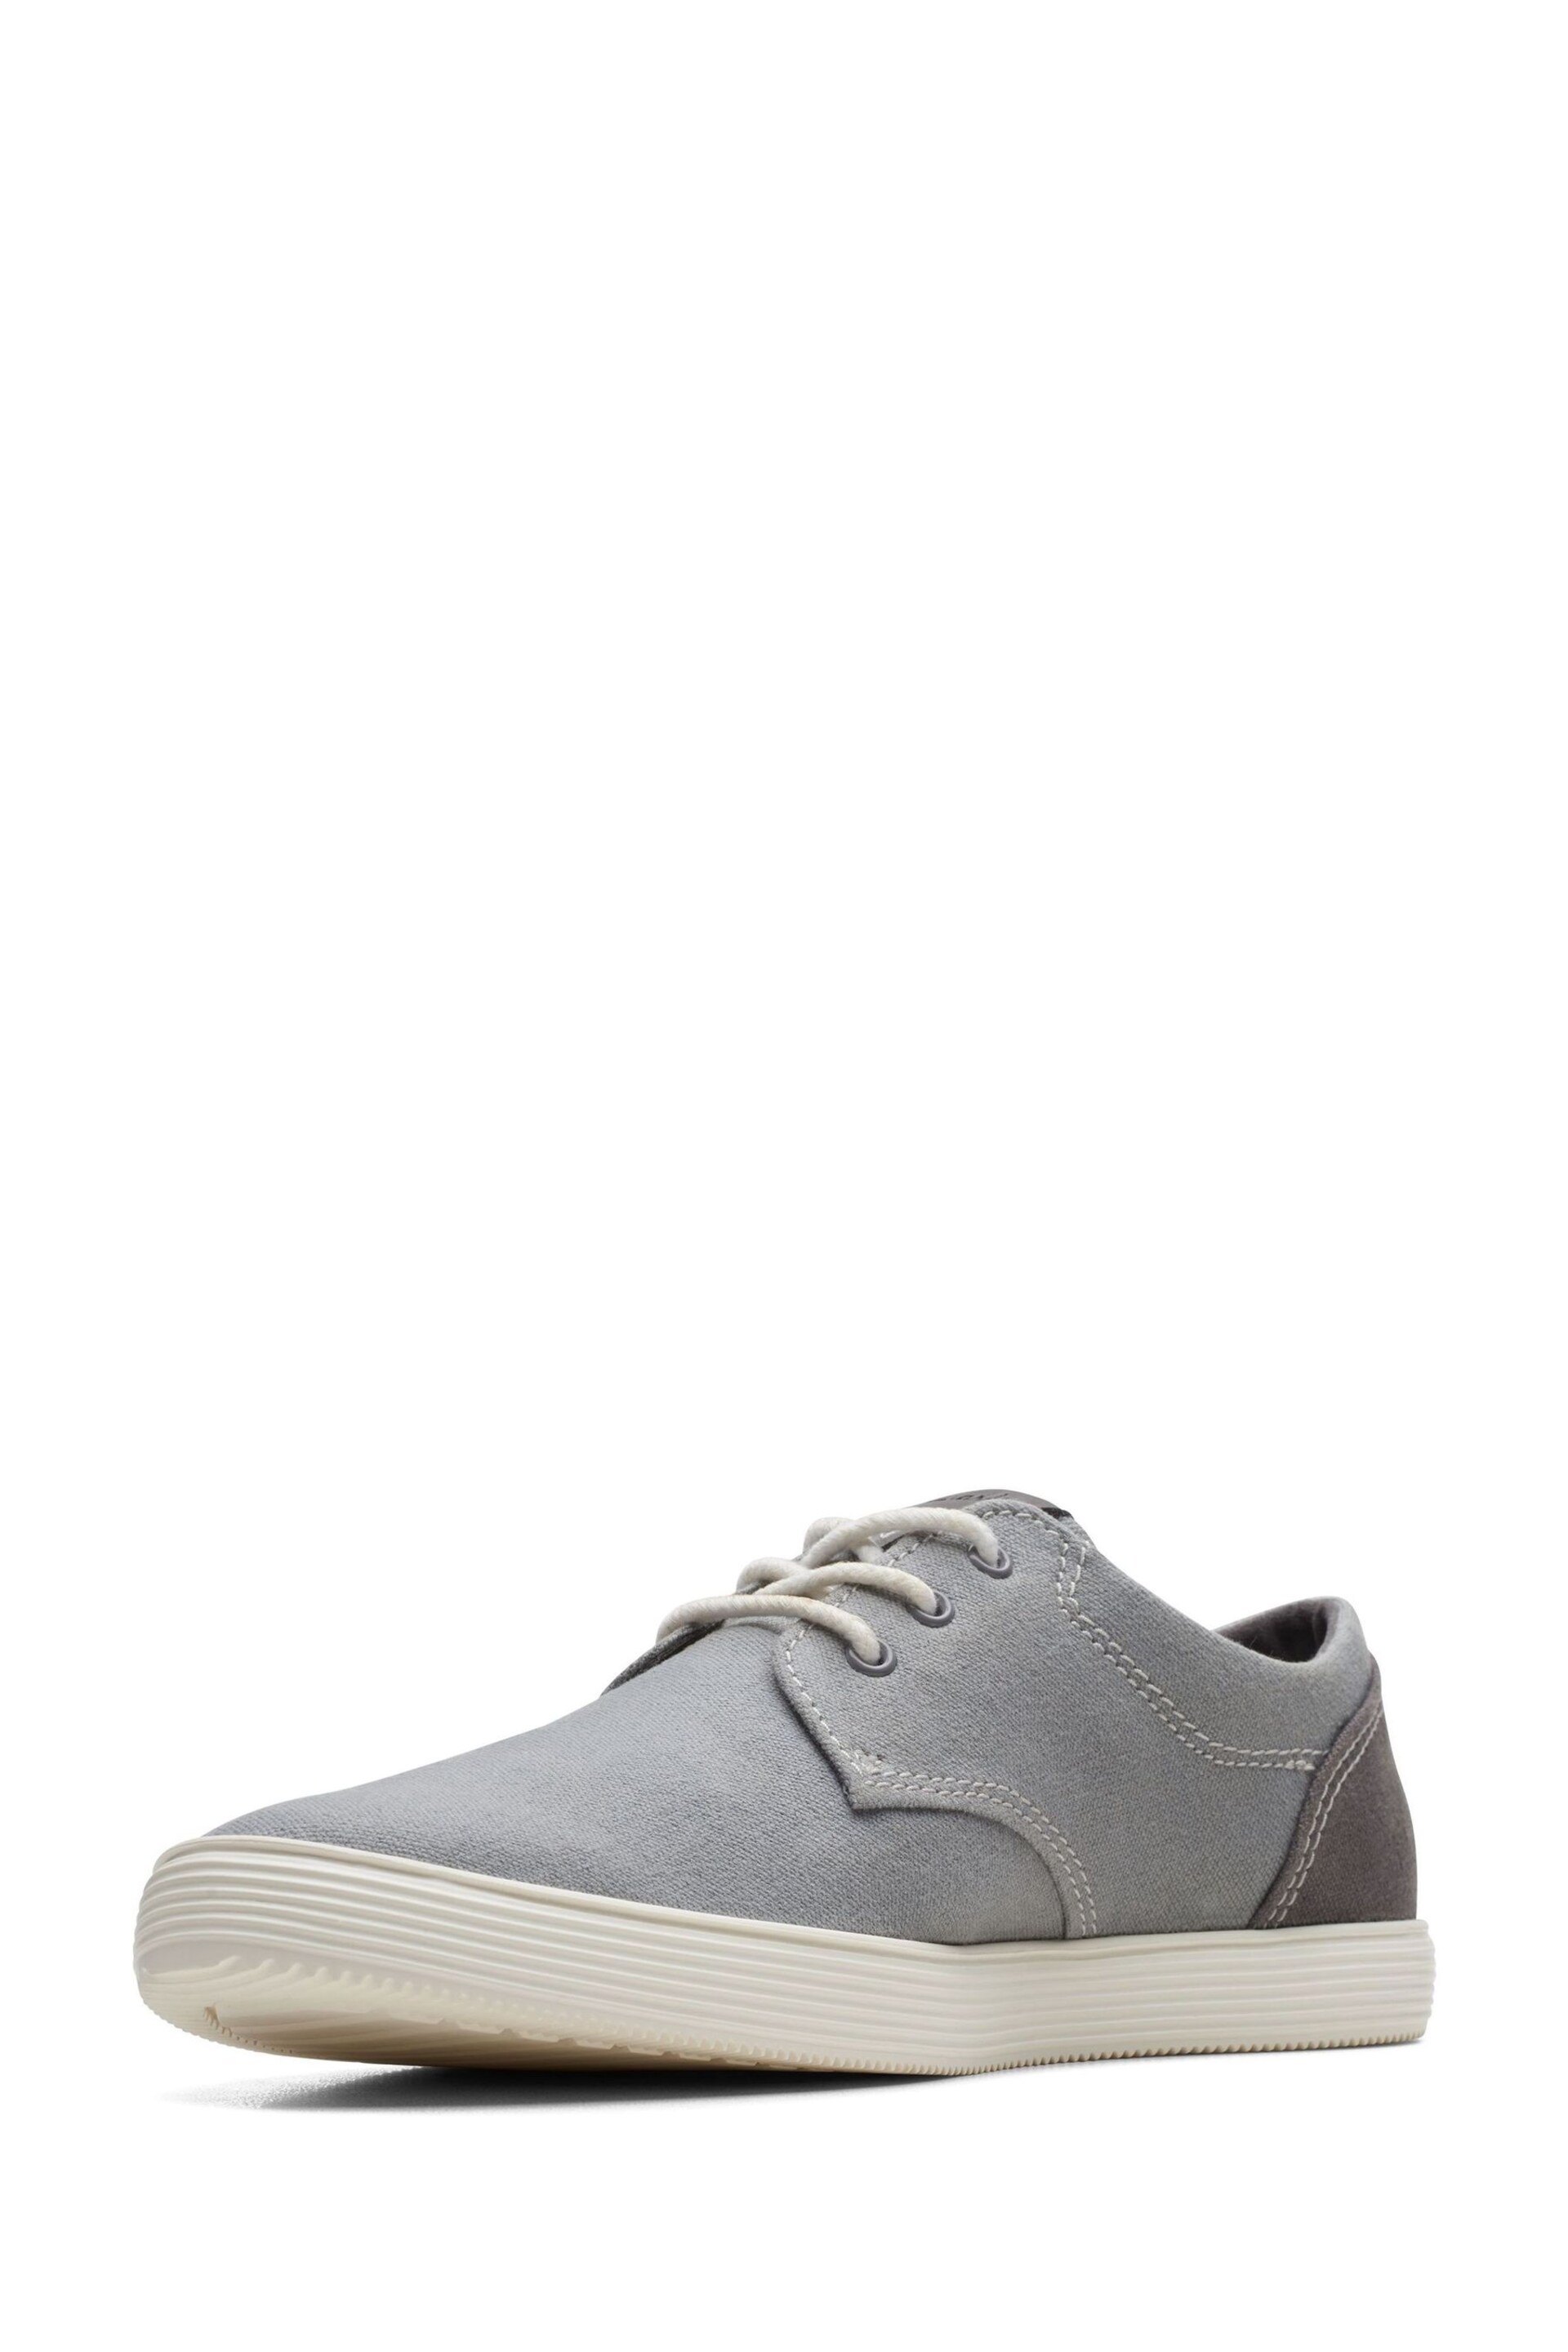 Clarks Grey Canvas Sharkford Walk Shoes - Image 4 of 7